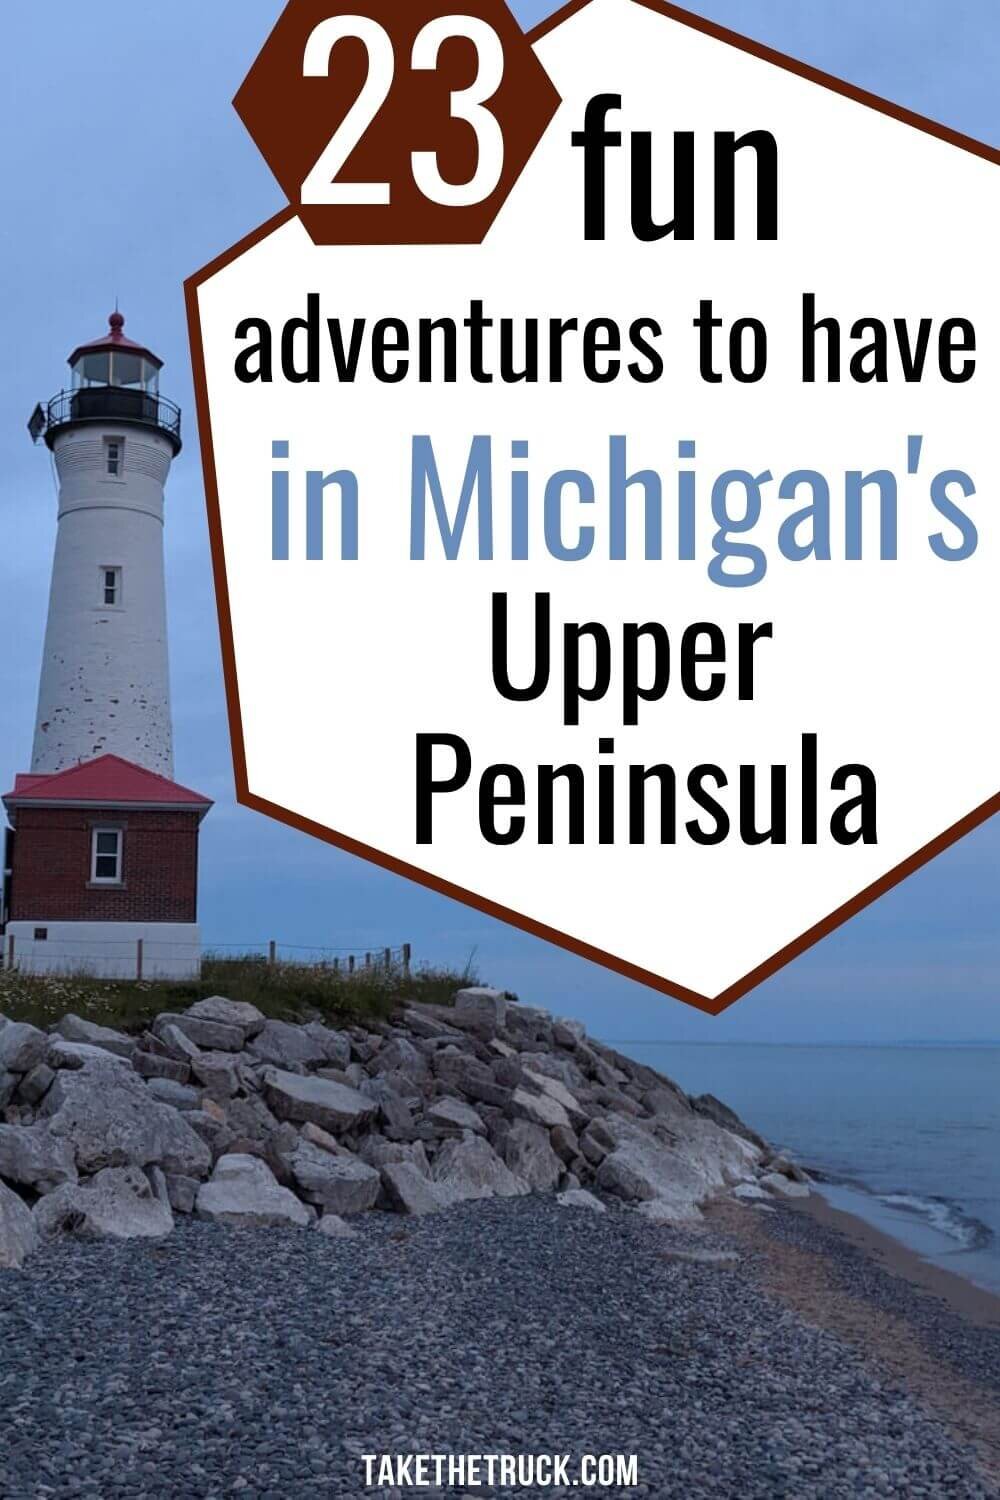 Plan your Upper Peninsula road trip or vacation with these 23 things to do in the U.P. of MIchigan-  parks, hiking, lighthouses, forests, great lakes, attractions, off-roading -something for everyone!